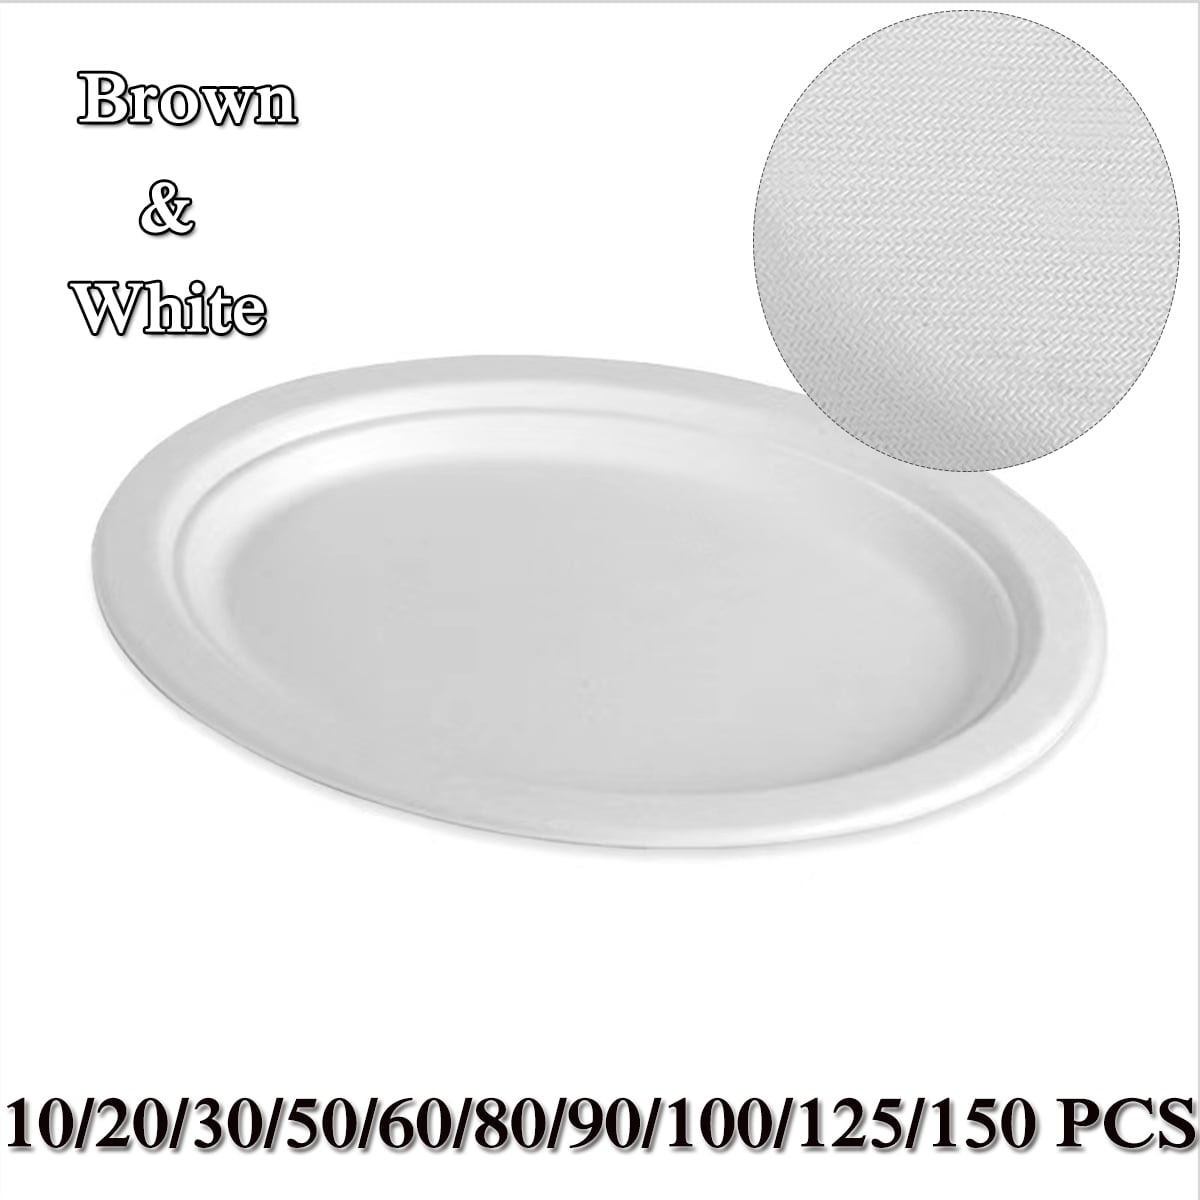 Oval Paper Plates White, 12 Inch Large Paper Plates, 100%, 56% OFF